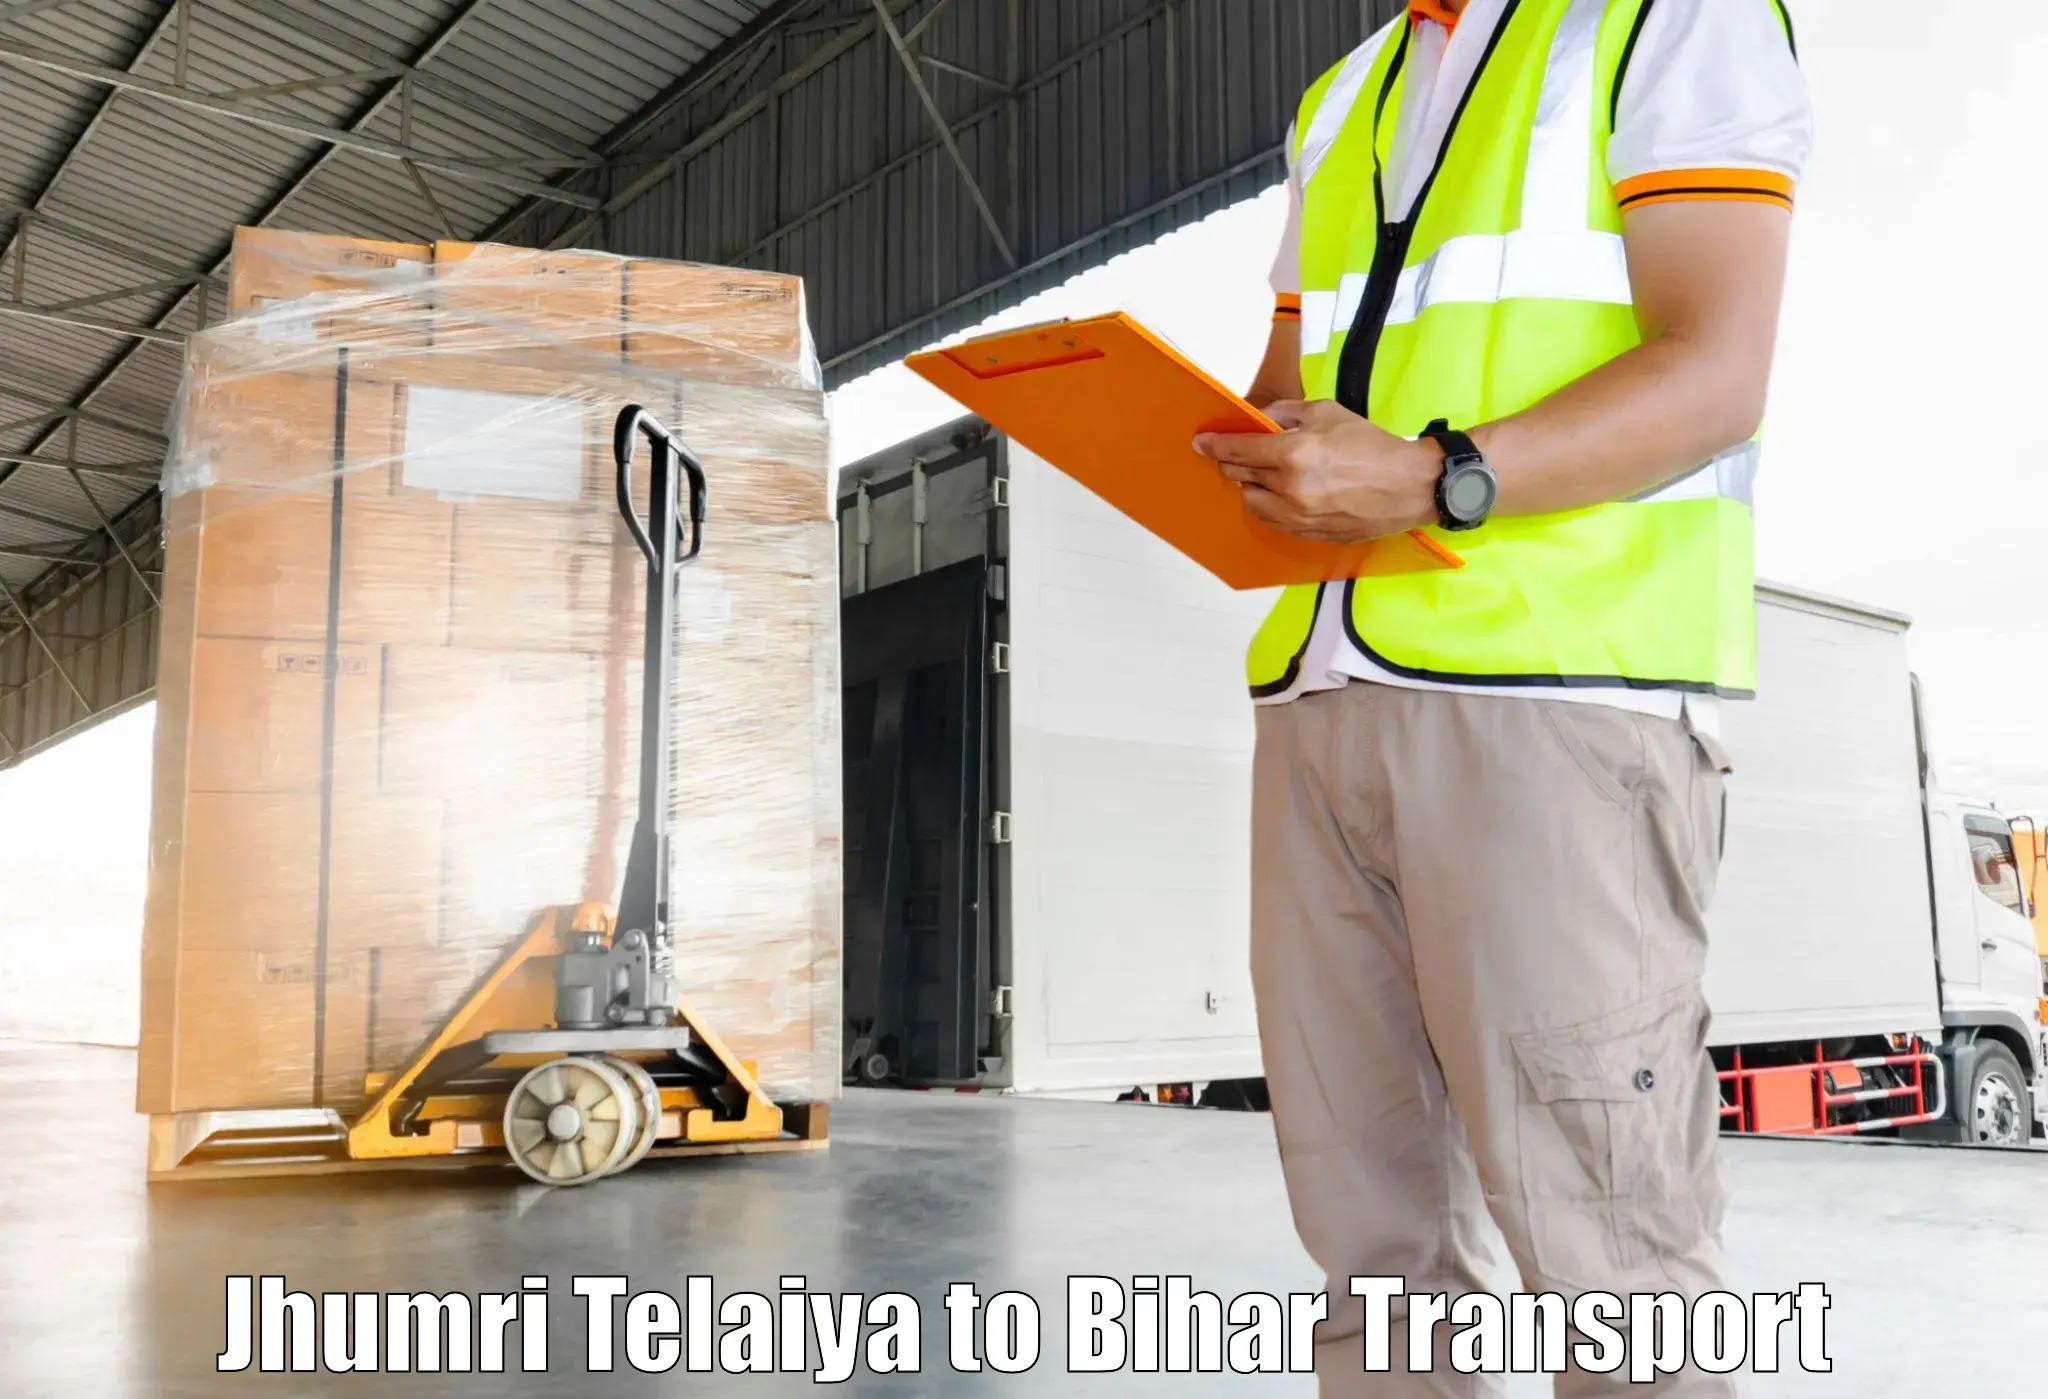 Package delivery services in Jhumri Telaiya to Dehri